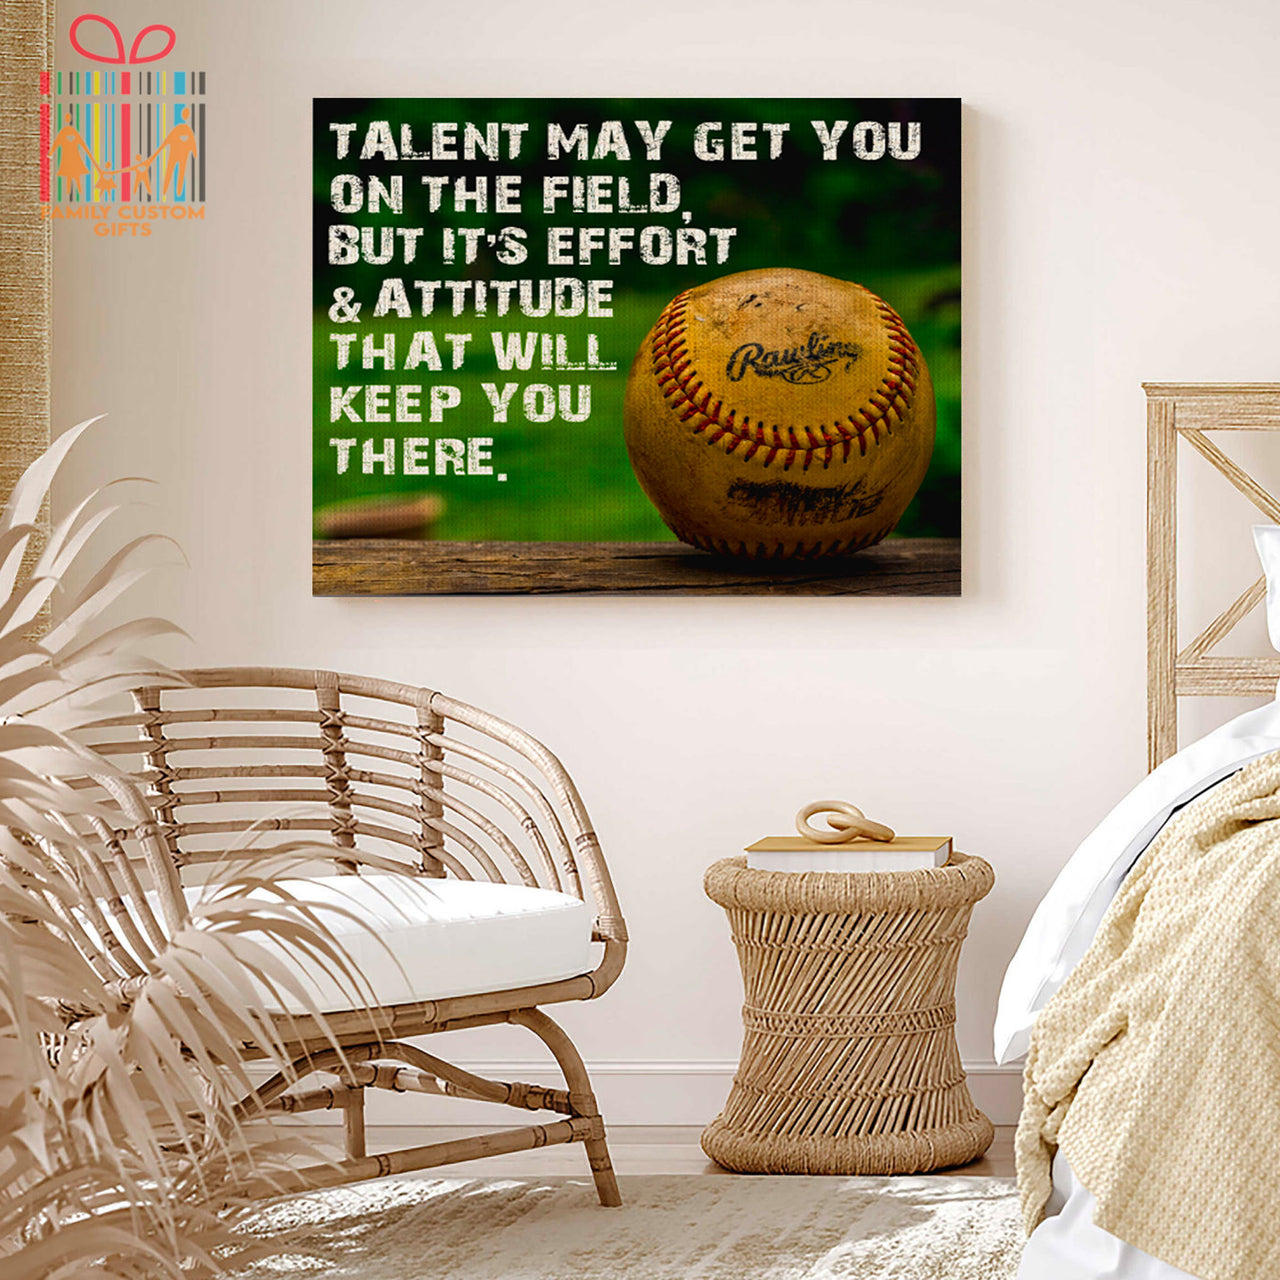 Custom Poster Prints Wall Art Baseball Talent May Get You On The Field Personalized Gifts Wall Decor